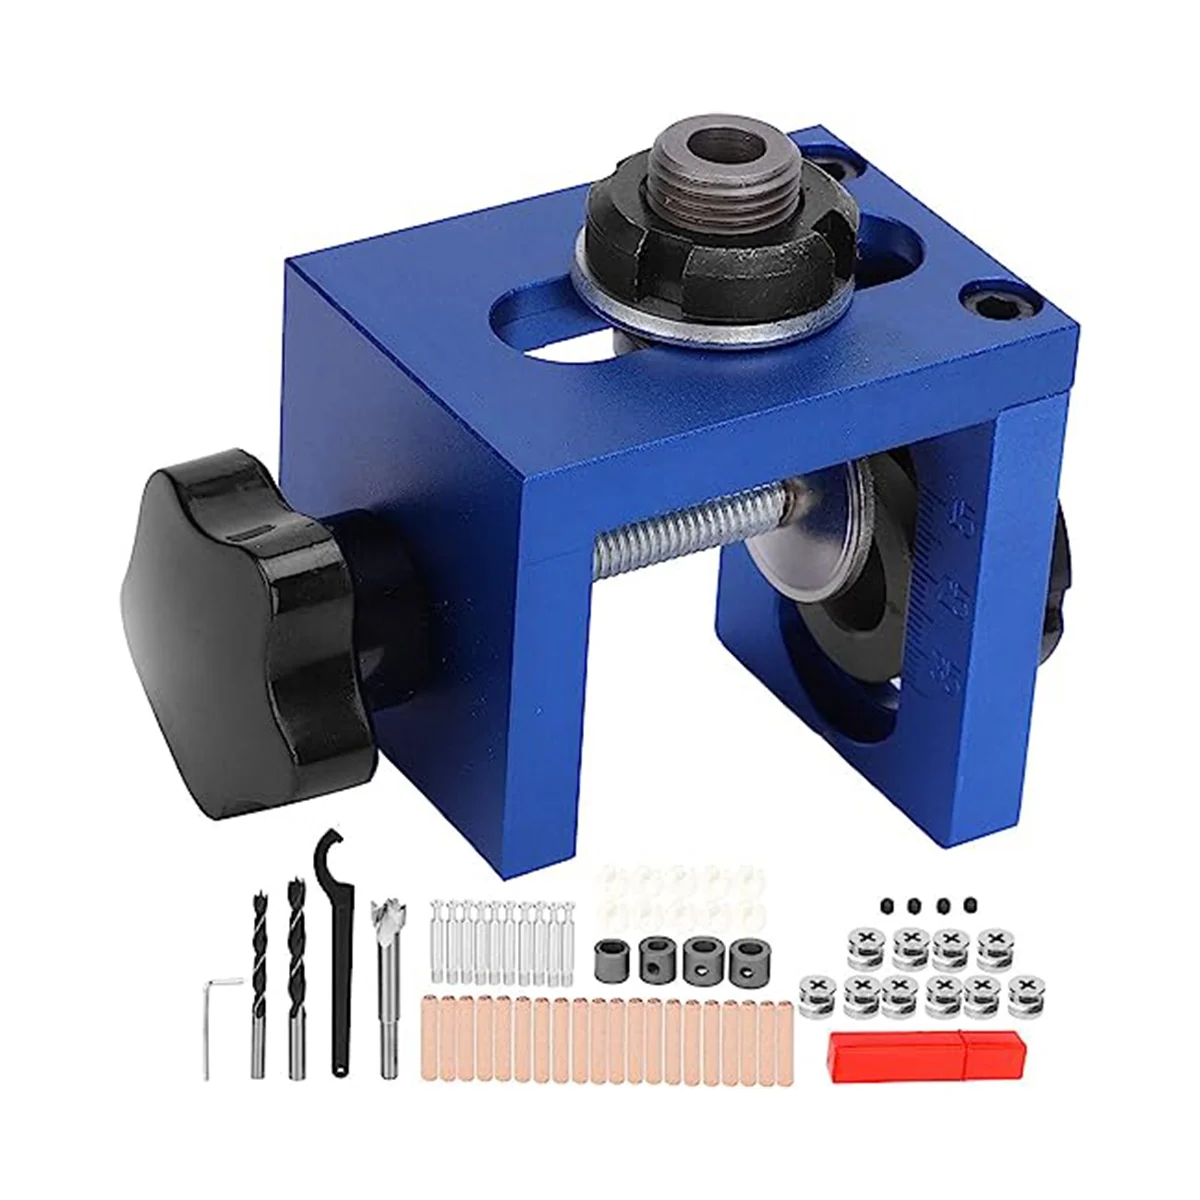 

3-In-1 Punching Locator Hole Opener Round Wood Tenon Woodworking Punching Locator Kit for Woodworking Drilling